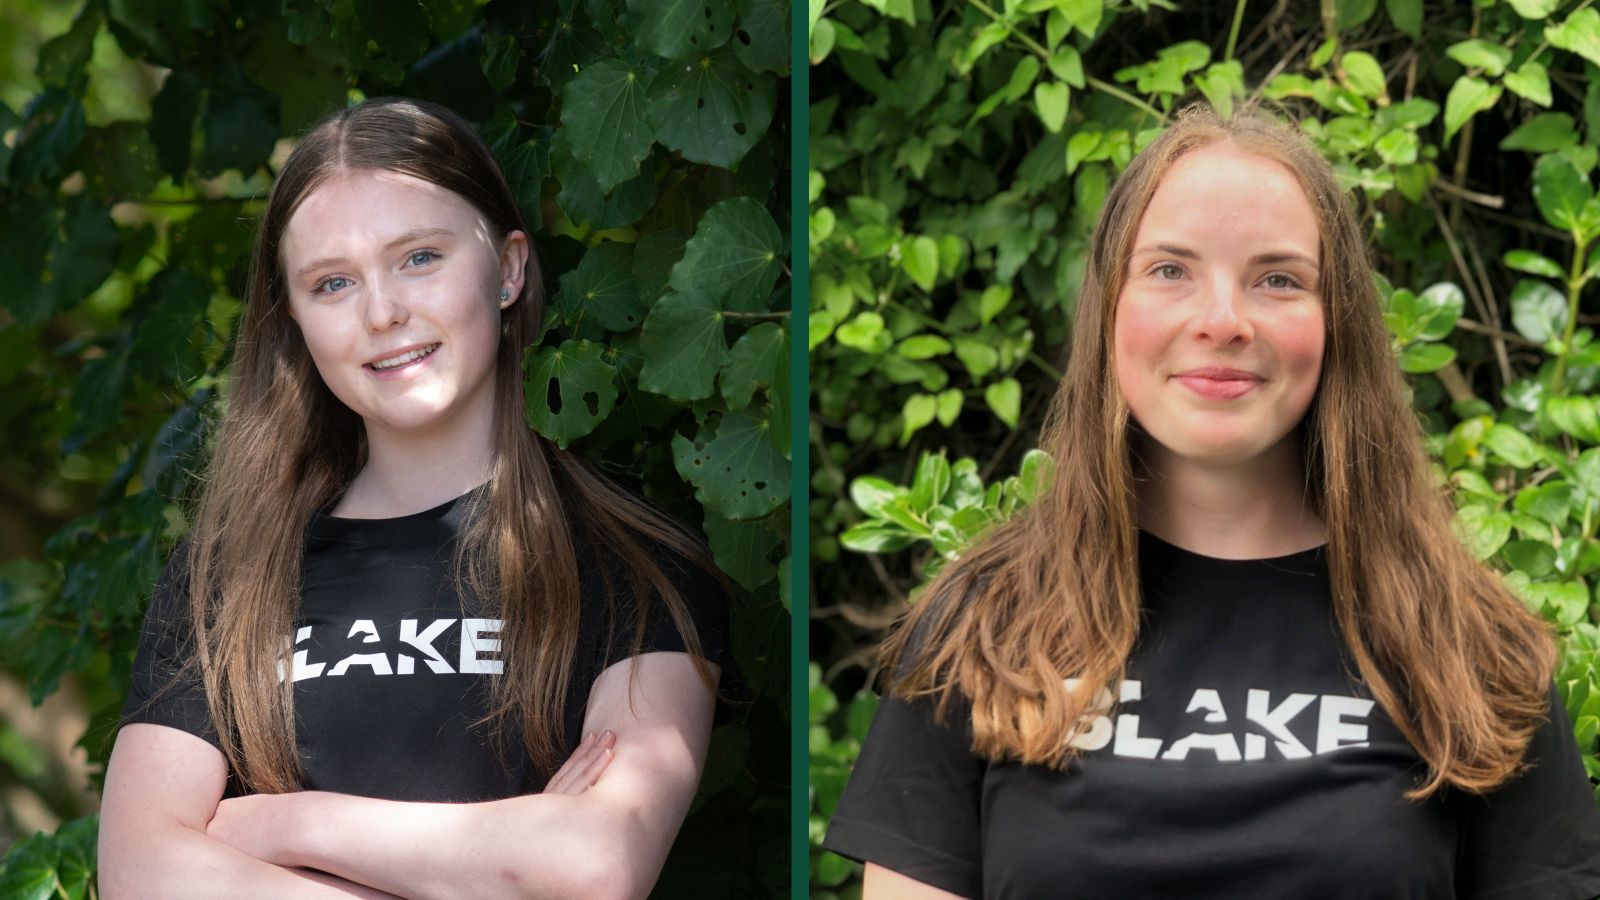 Elizabeth Werner and Brittany Florence-Bennett stand in front of green bush wearing their black Blake Ambassador t-shirts.